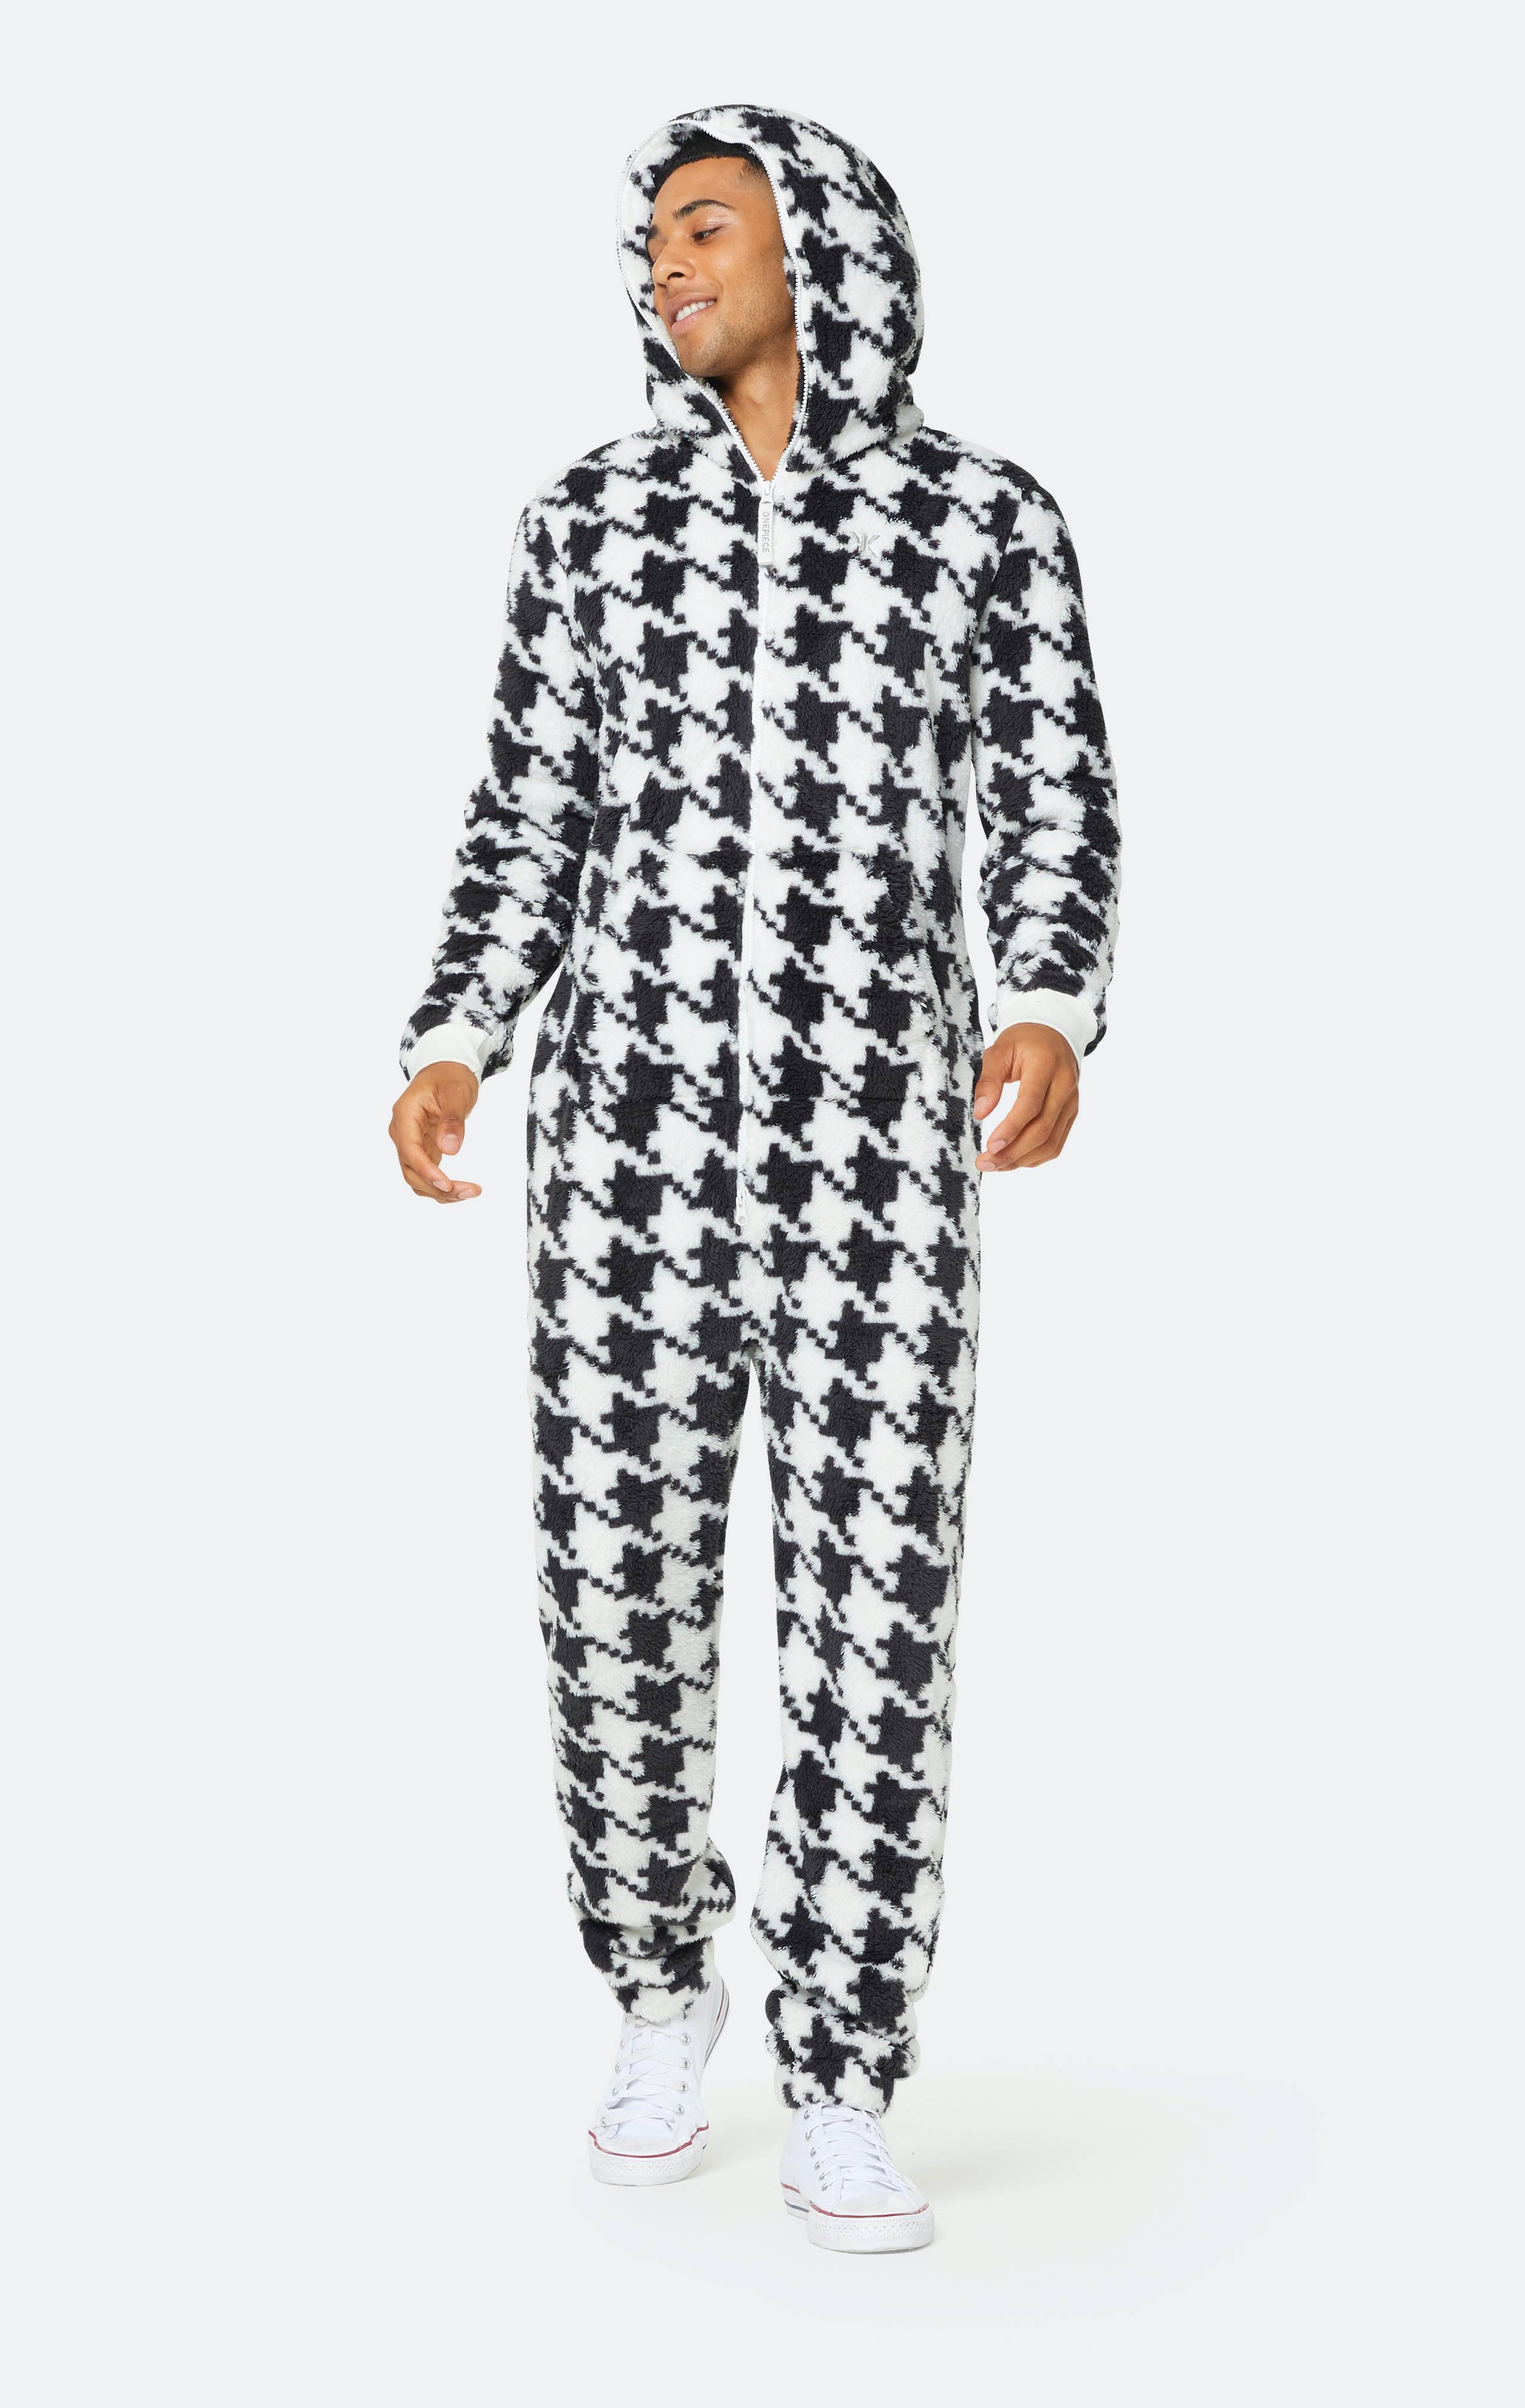 Onepiece The New Puppy Jumpsuit Houndsthooth - 3